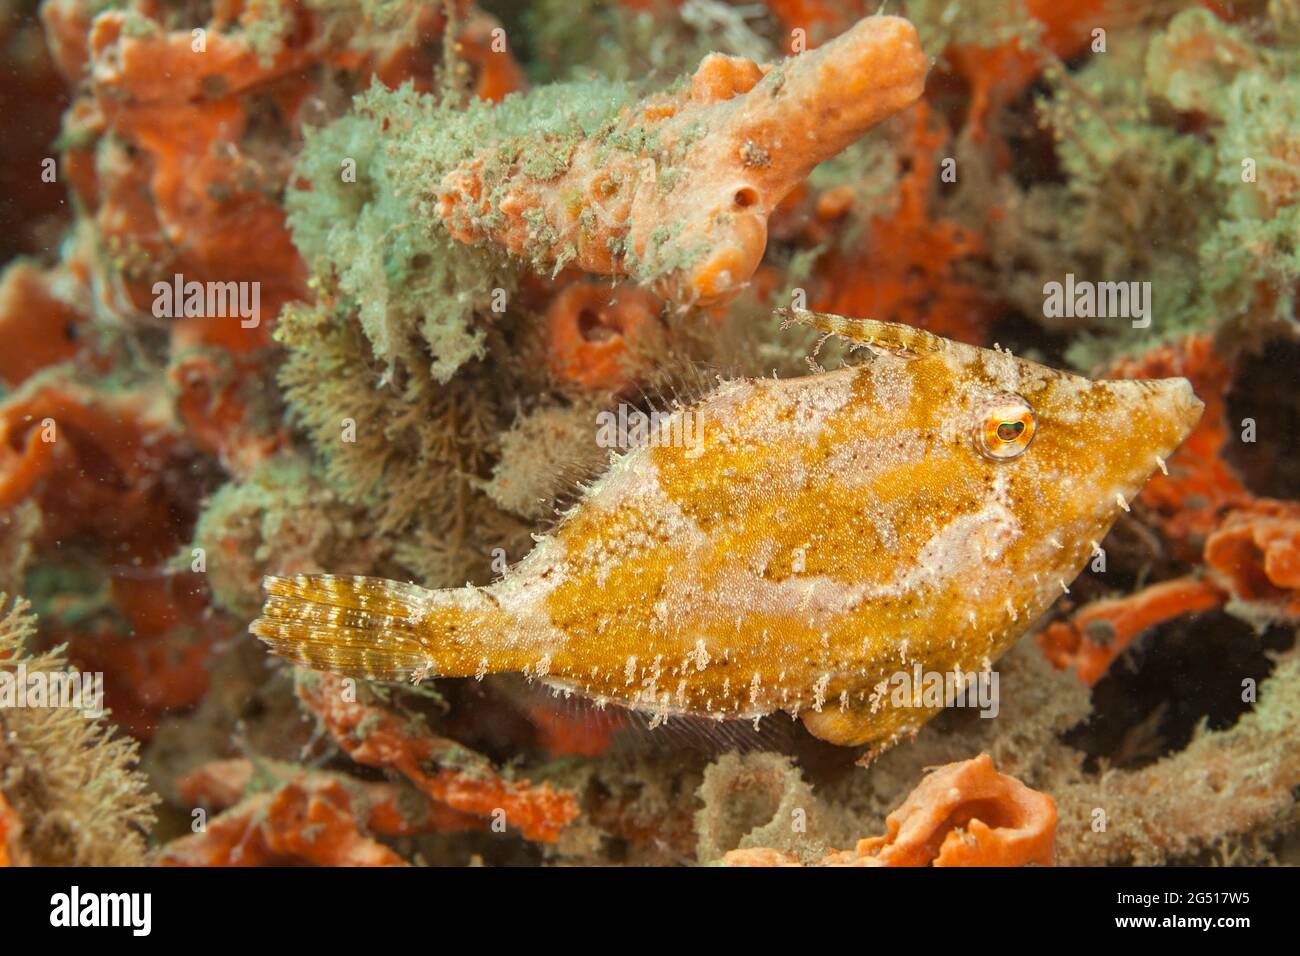 A slender filefish, Monacanthus tuckeri,  camouflaged against the background of a coral reef, off Singer Island, Florida, USA. Stock Photo